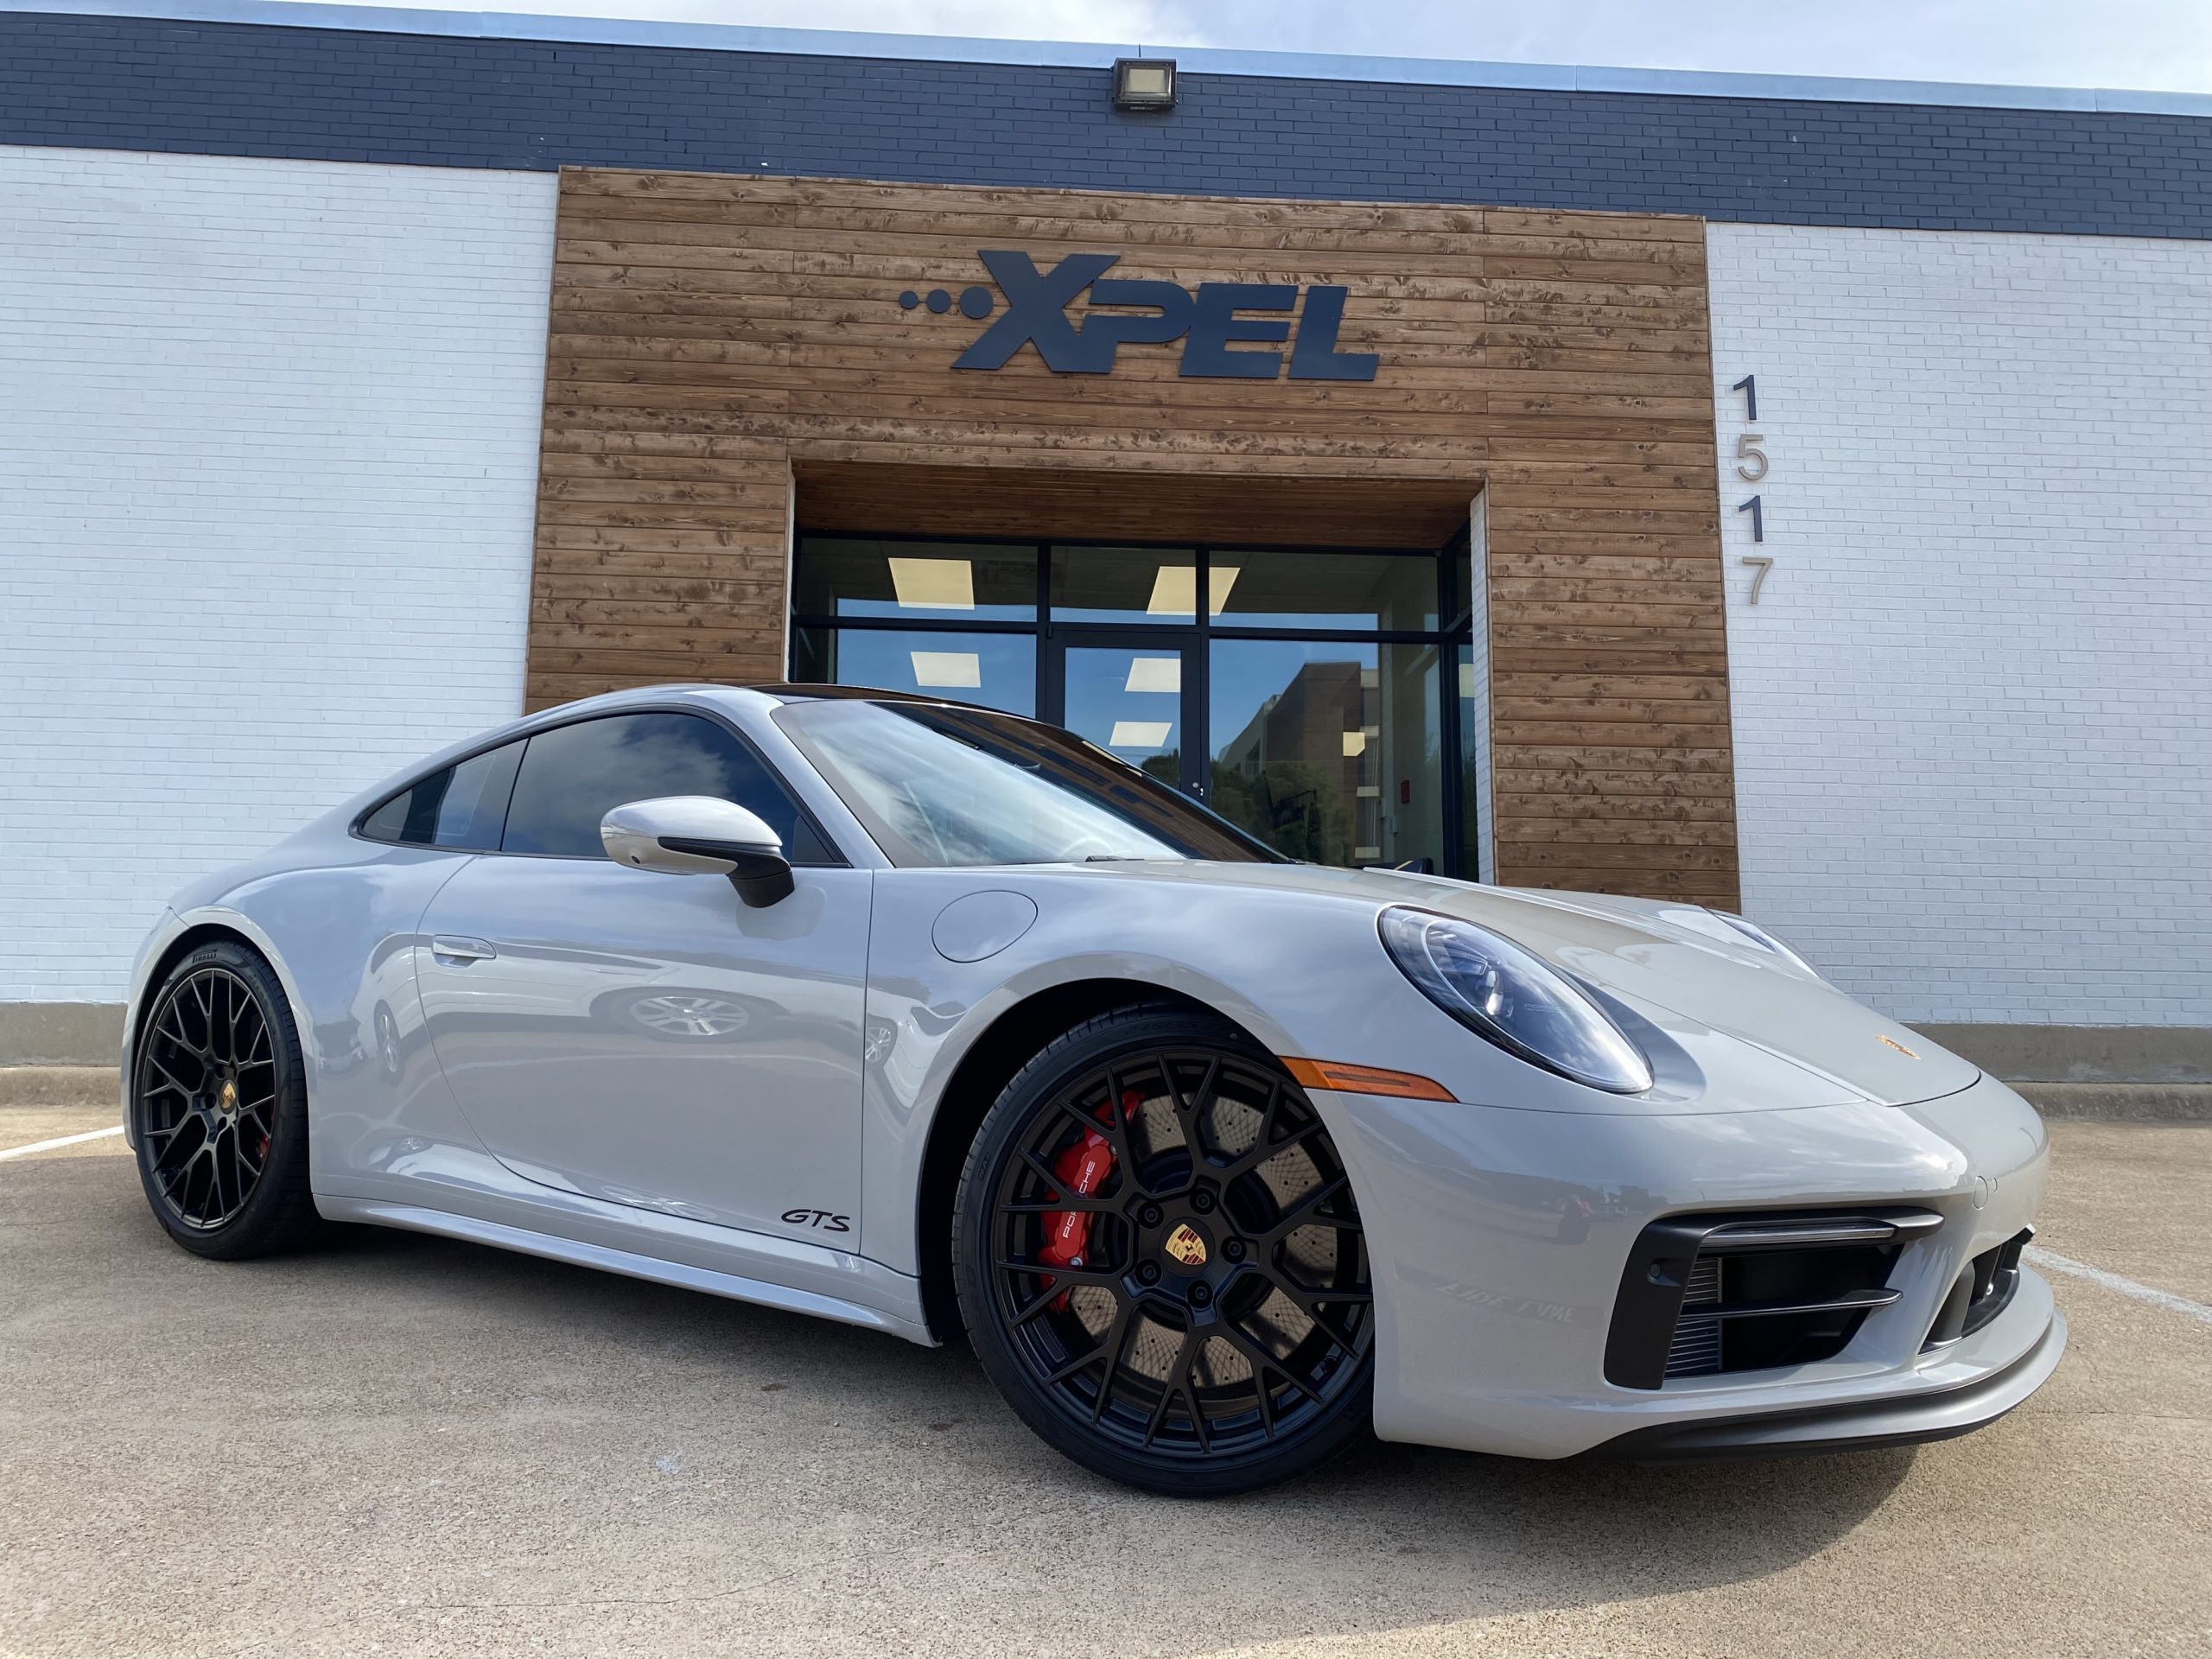 2022 Porsche 911 GTS full front ultimate plus ppf and fusion ceramic coating